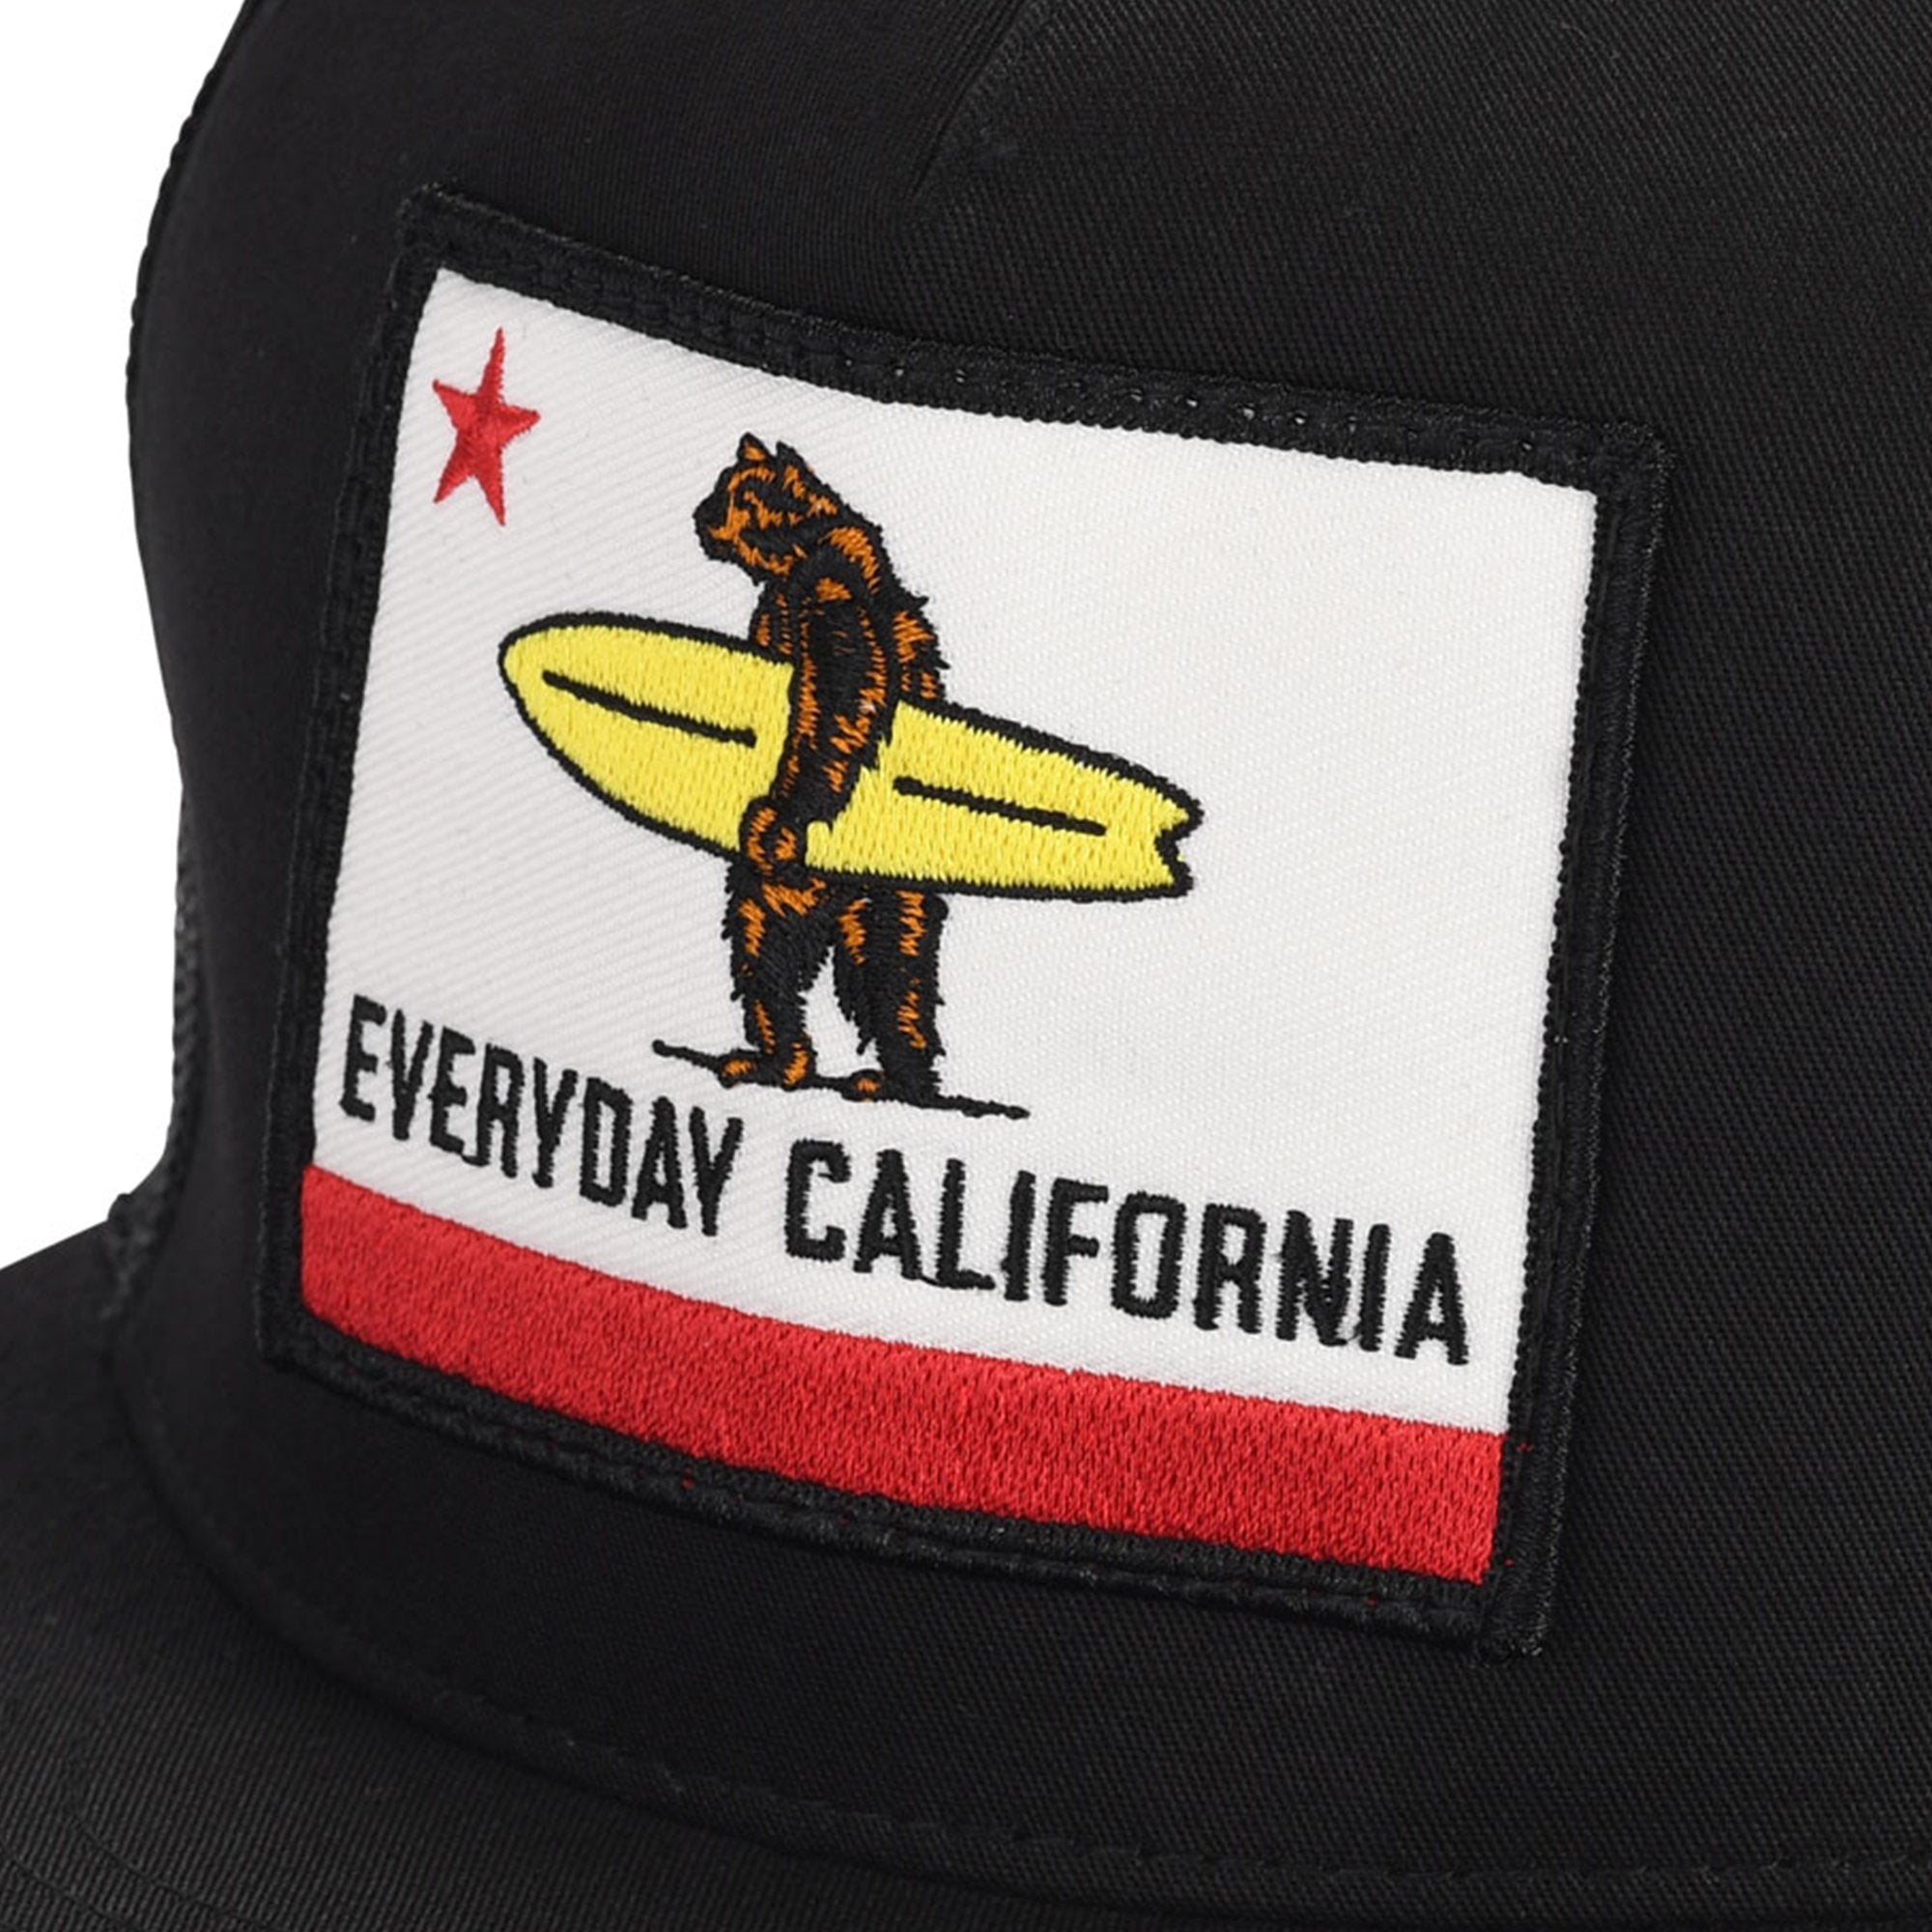 Patch on the Shores Black Hat from Everyday California 